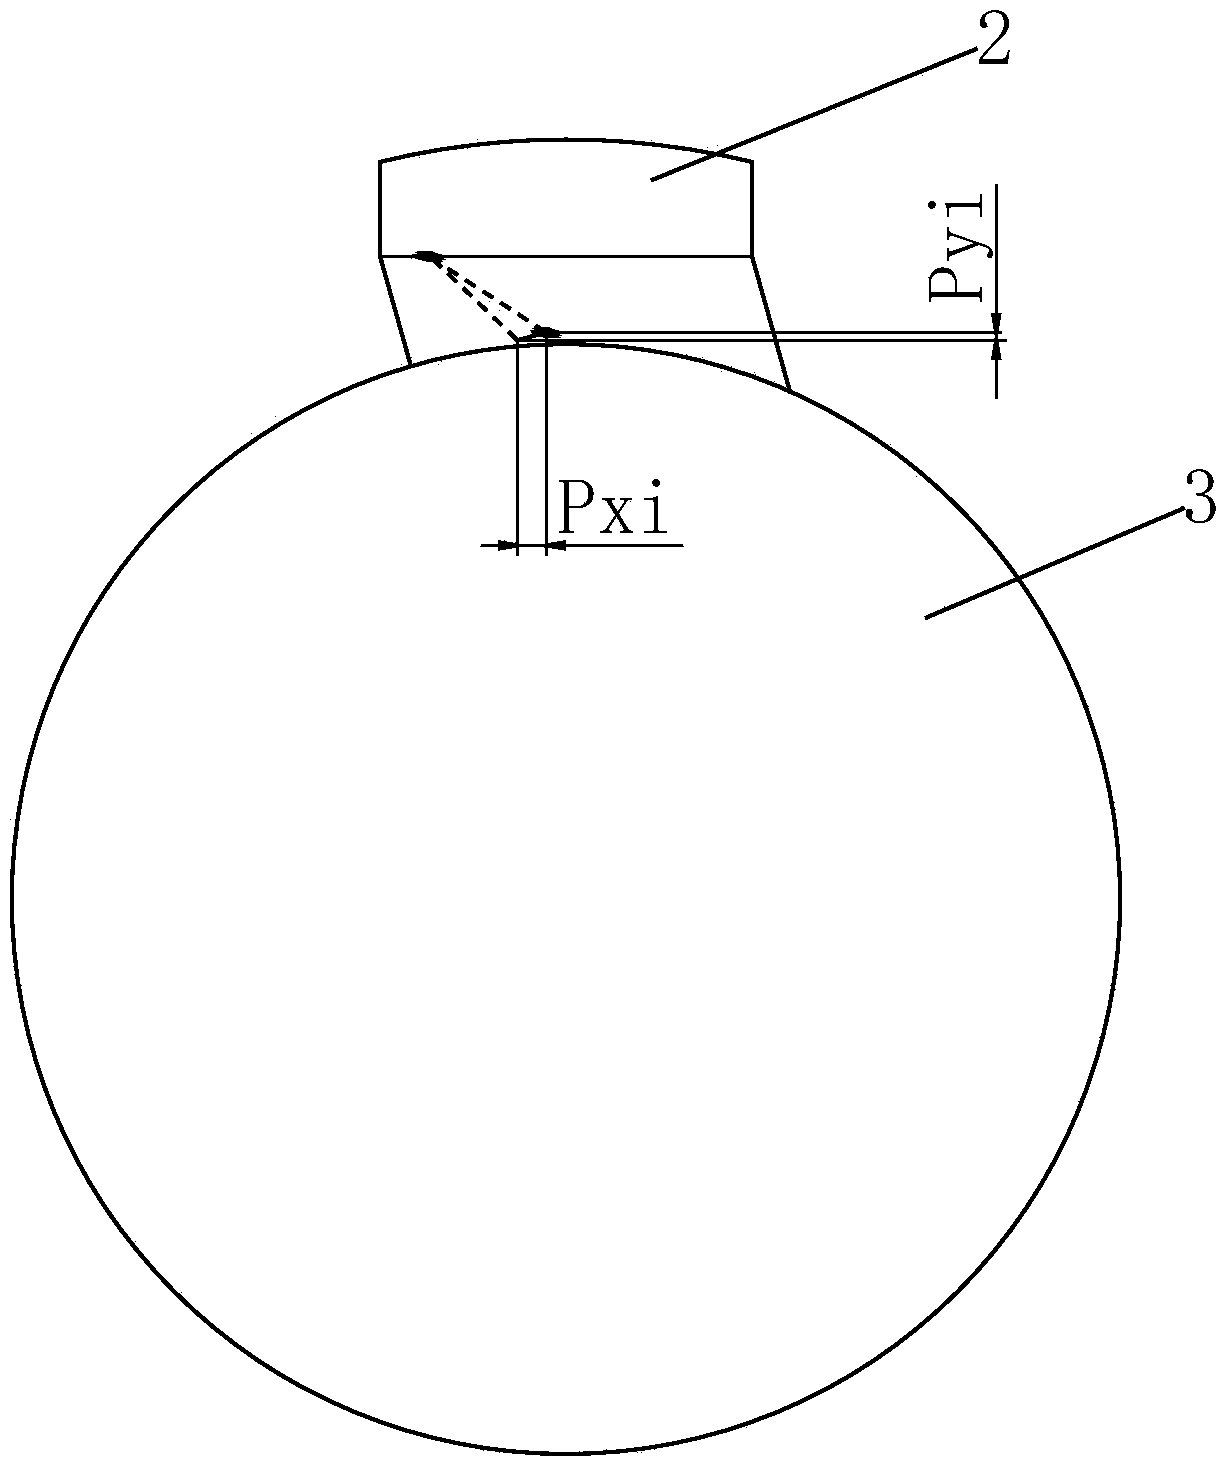 Amplitude test method of water lubrication rubber tail bearing based on machine vision technology